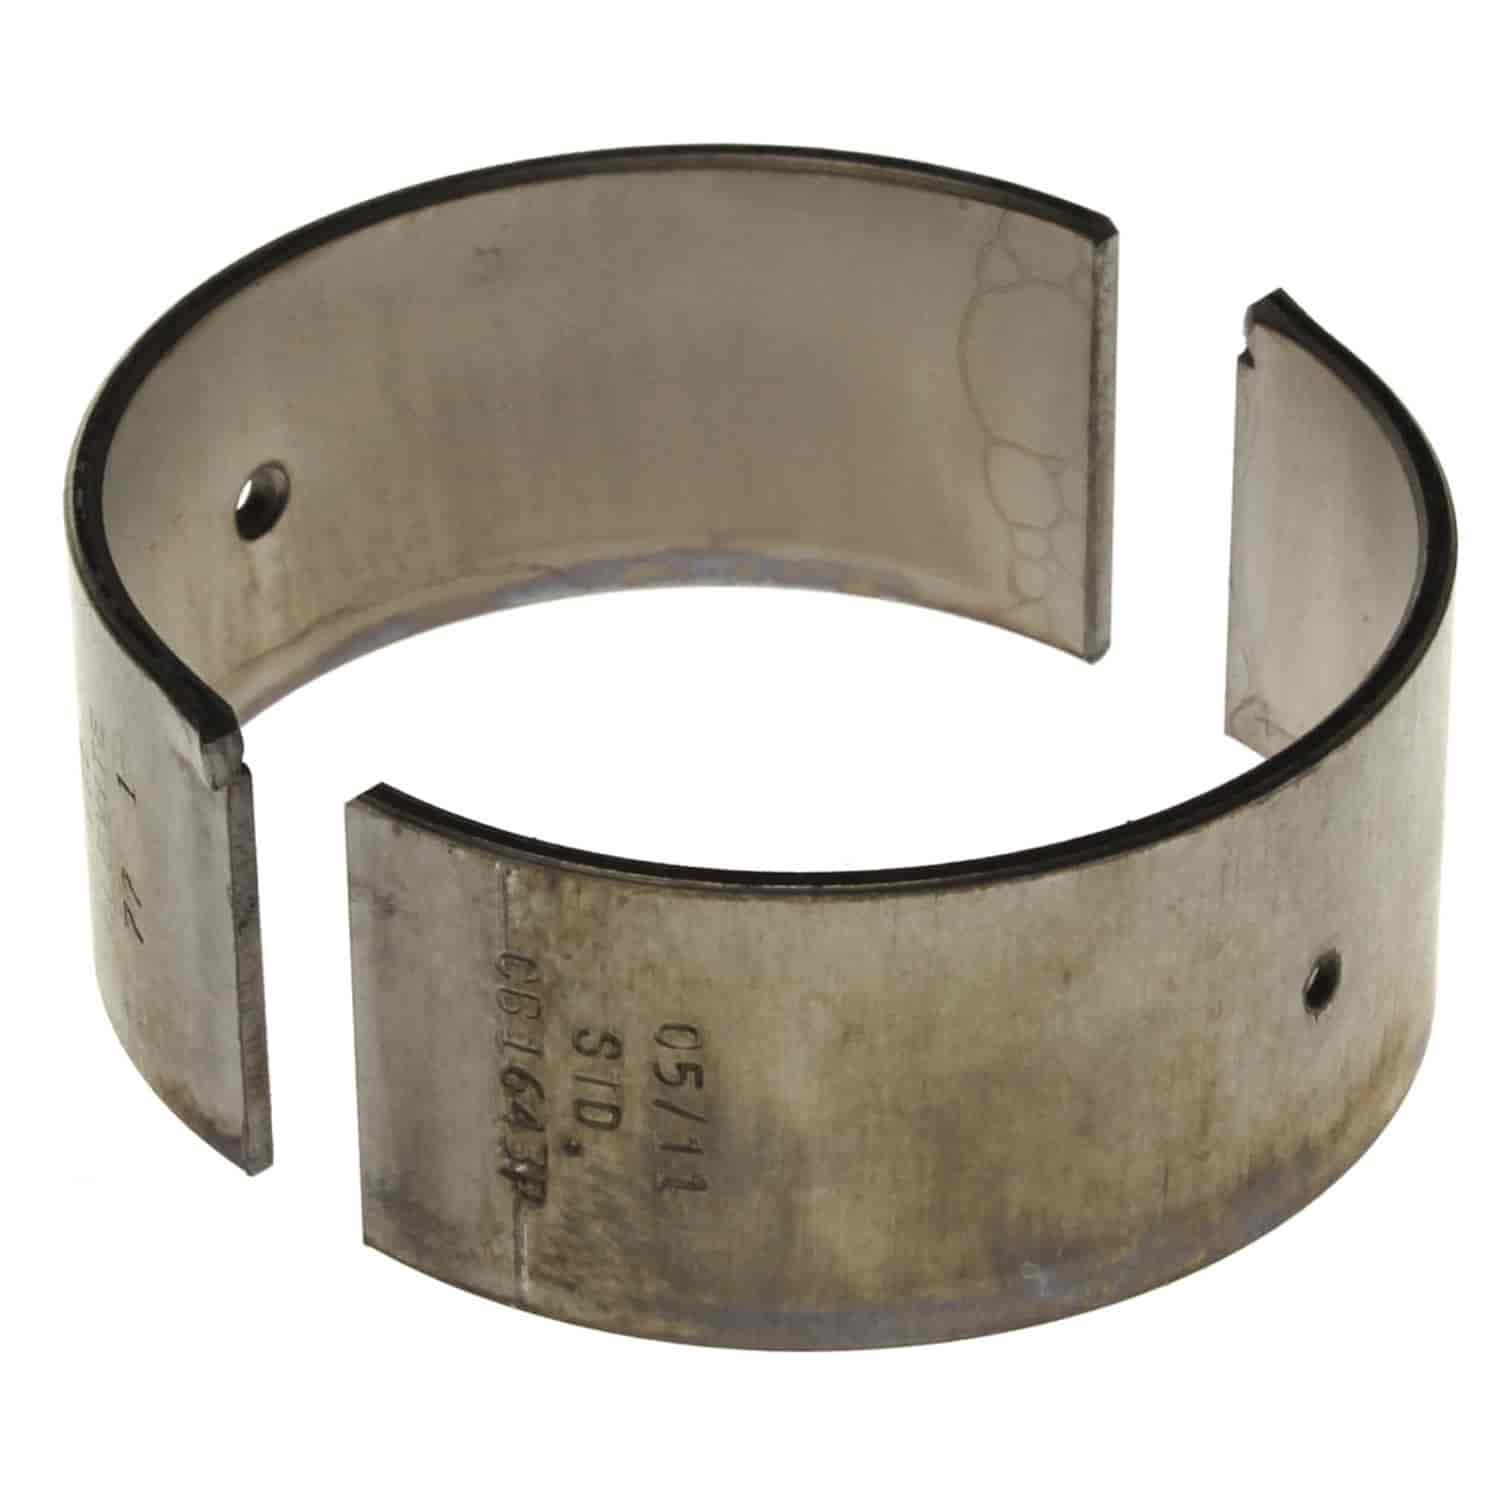 Connecting Rod Bearing Chrysler/Mistubishi  1971-1994 L4 1.6/1.8/2.0/2.4L with -.50mm Undersize